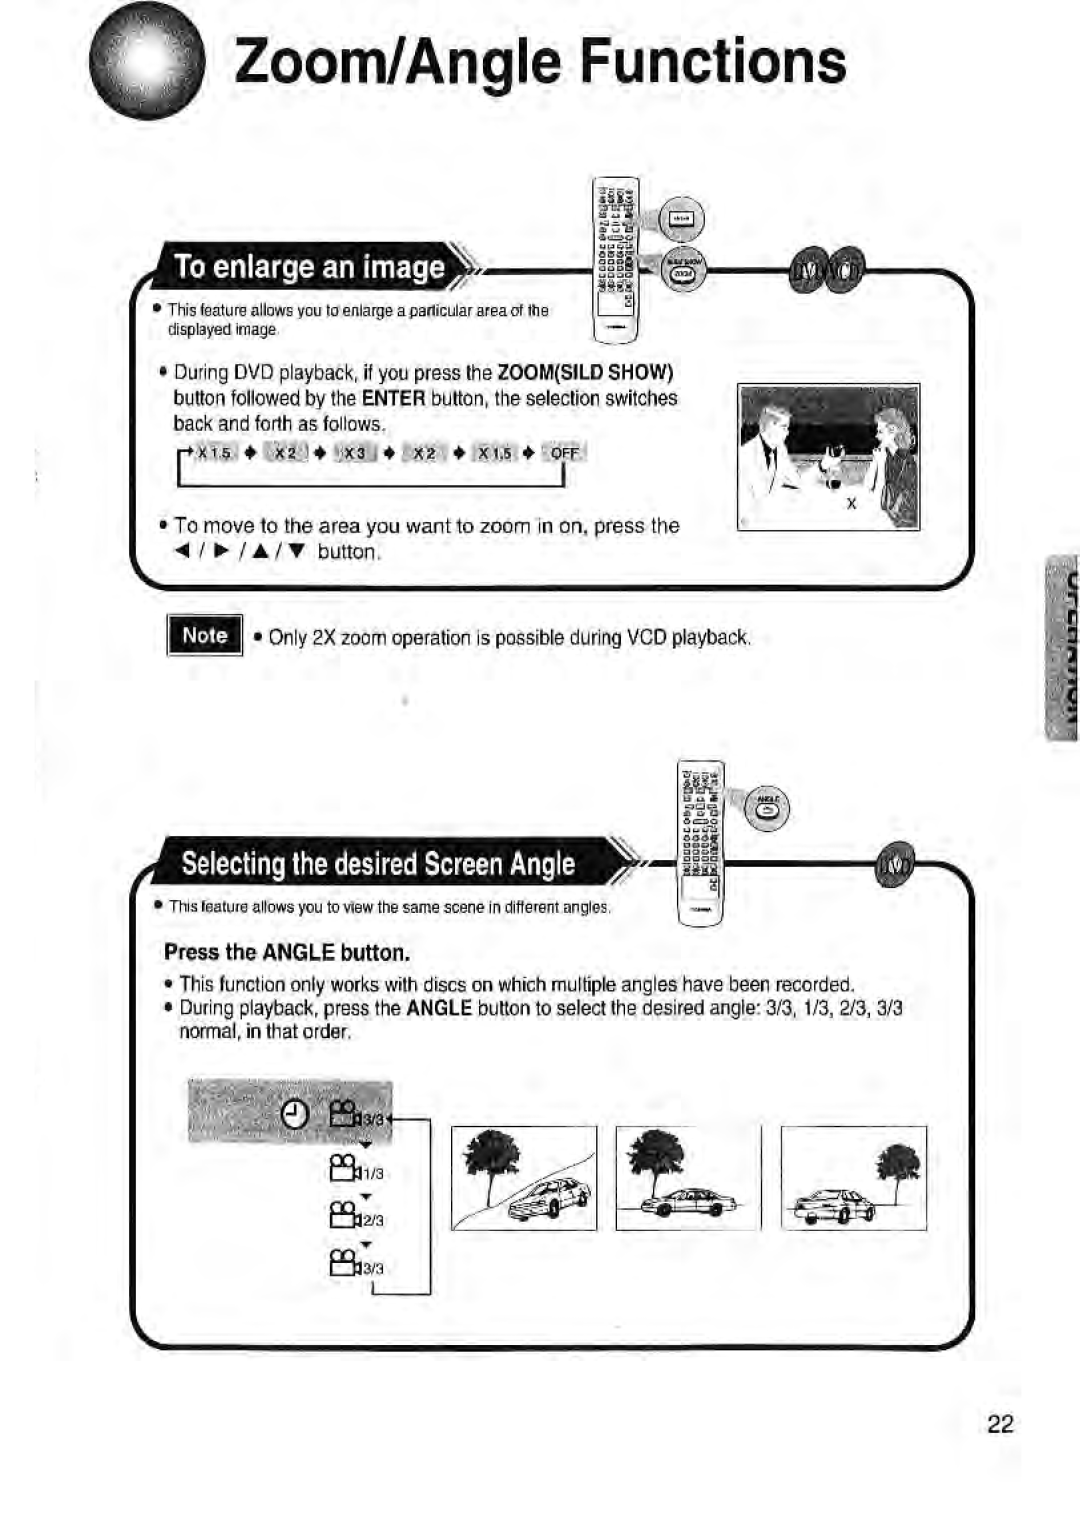 Toshiba SD-43HK owner manual Zoom/Angle Functions, Selecting the desired Screen Angle, To enlarge an image 